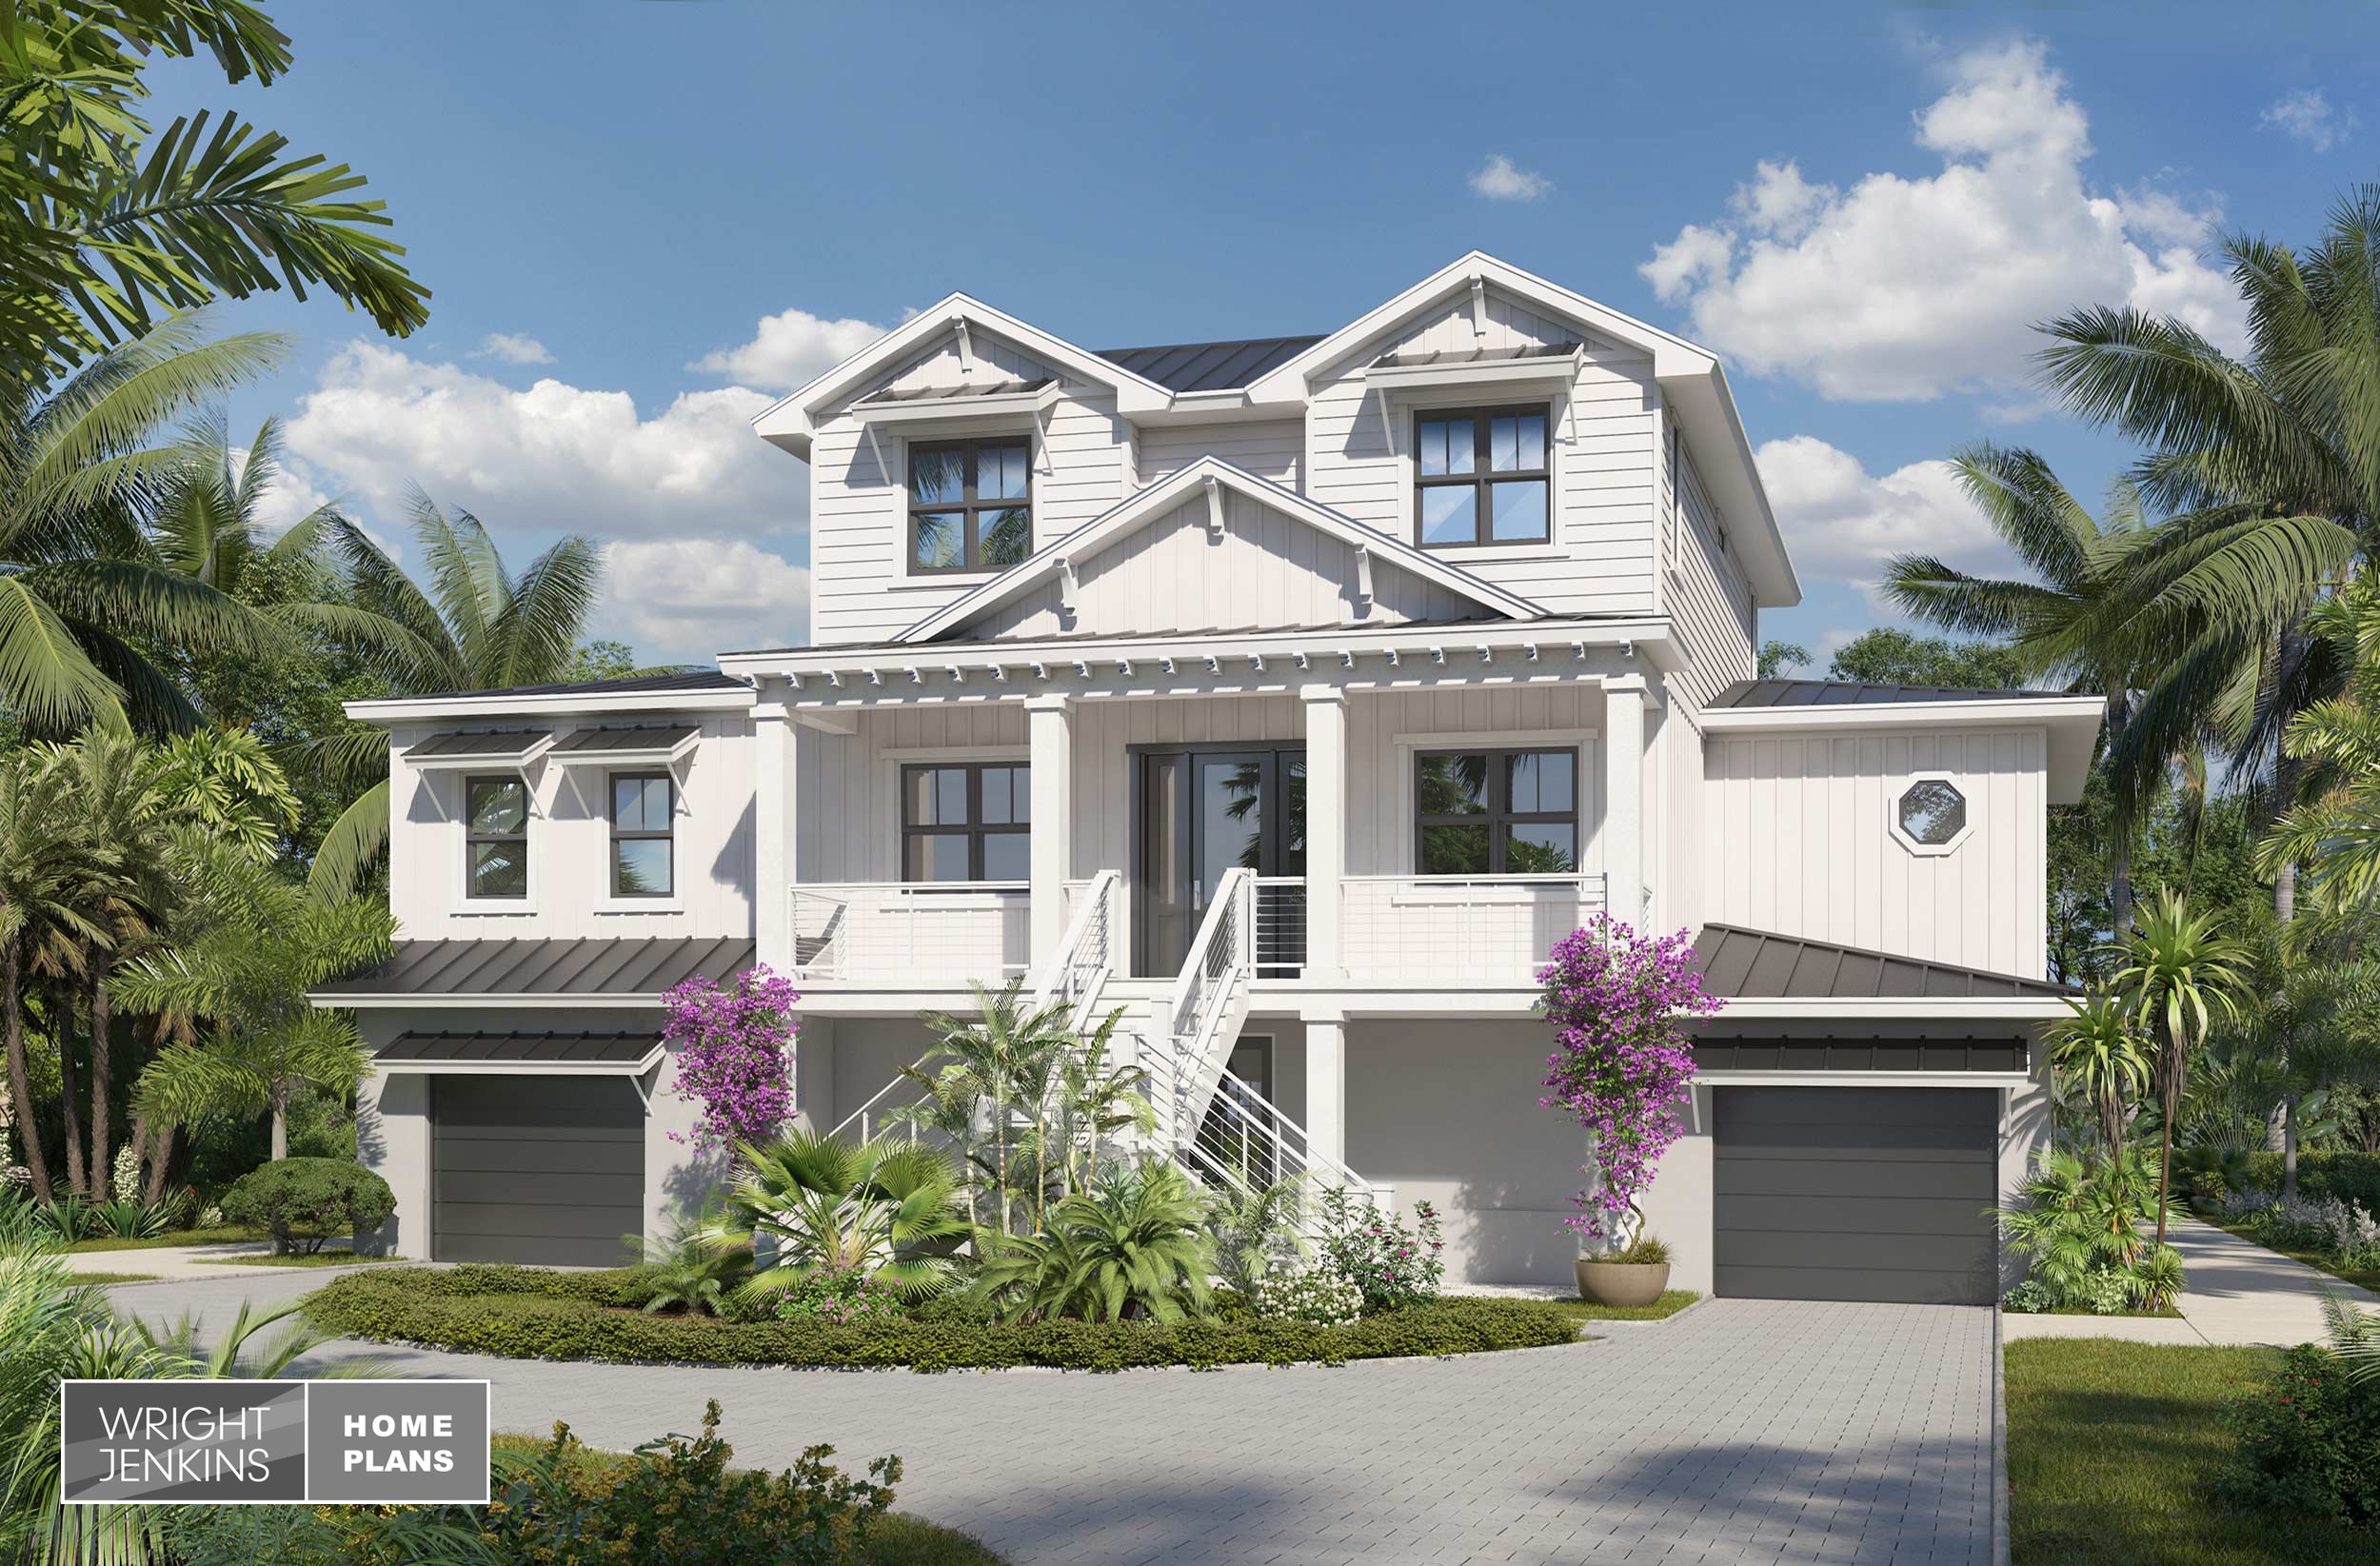    Featured Plan: Bayview Home Plan #719   